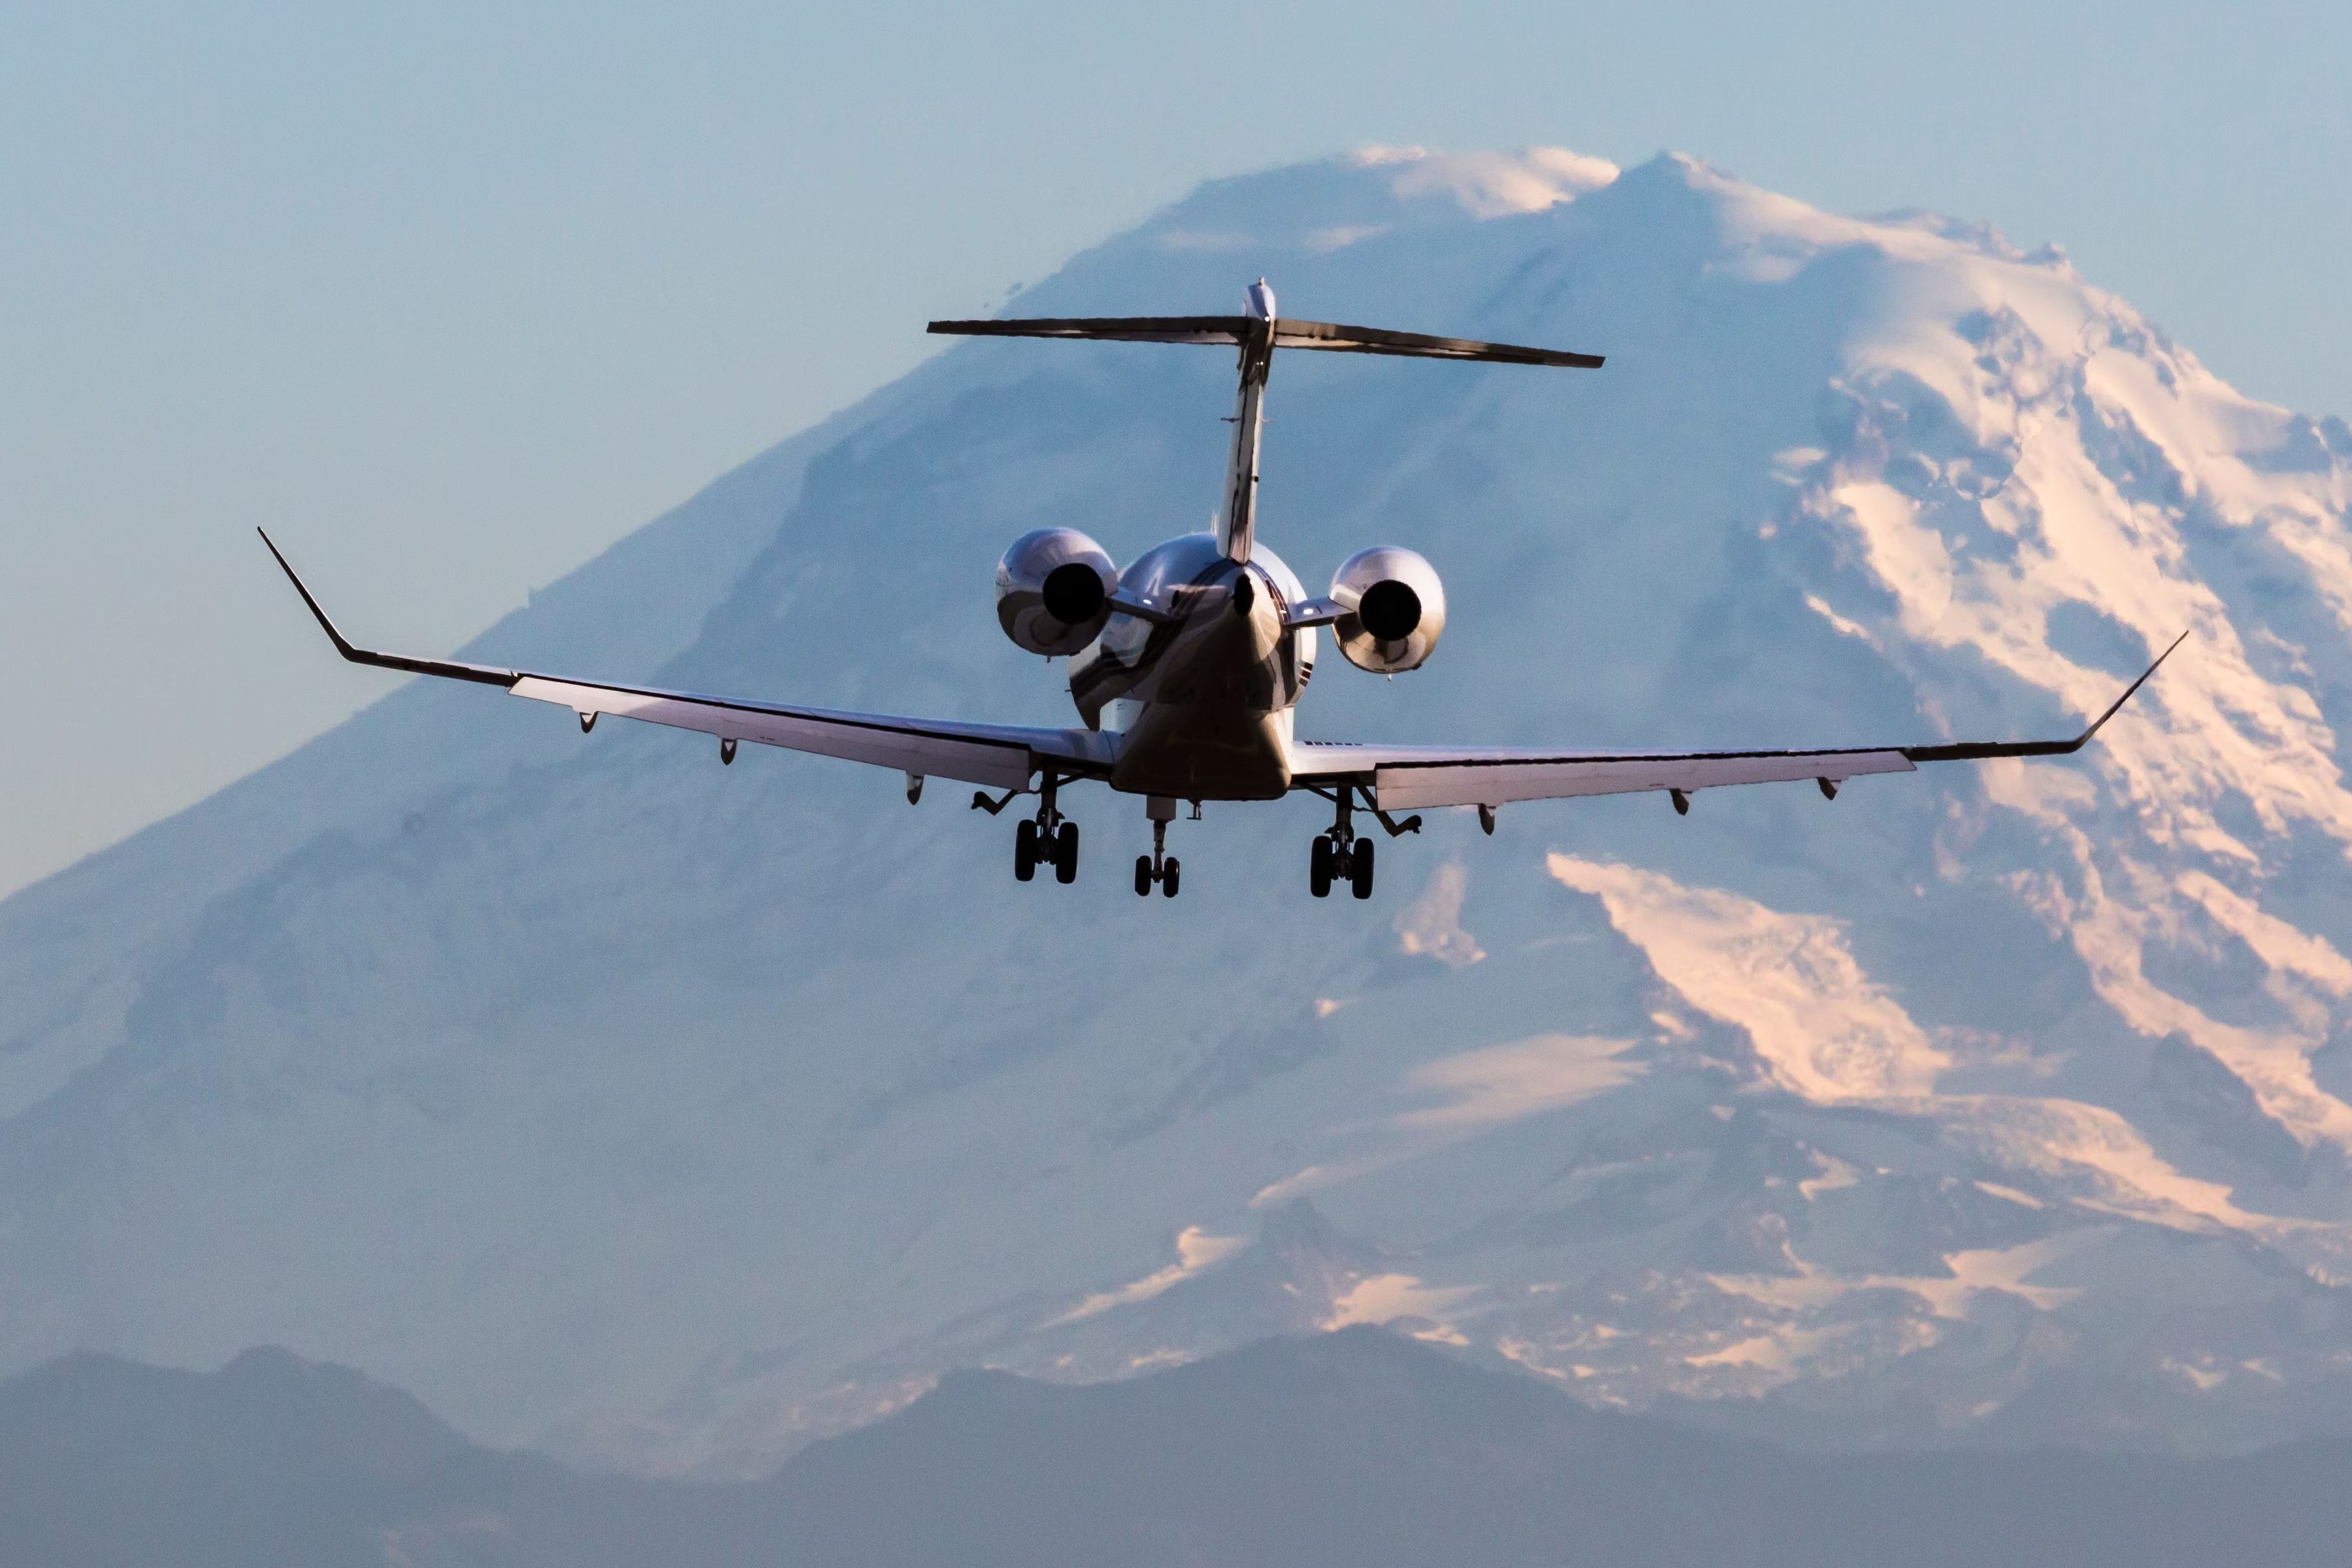 A Business jet flying in the sky, with a mountain in the background.